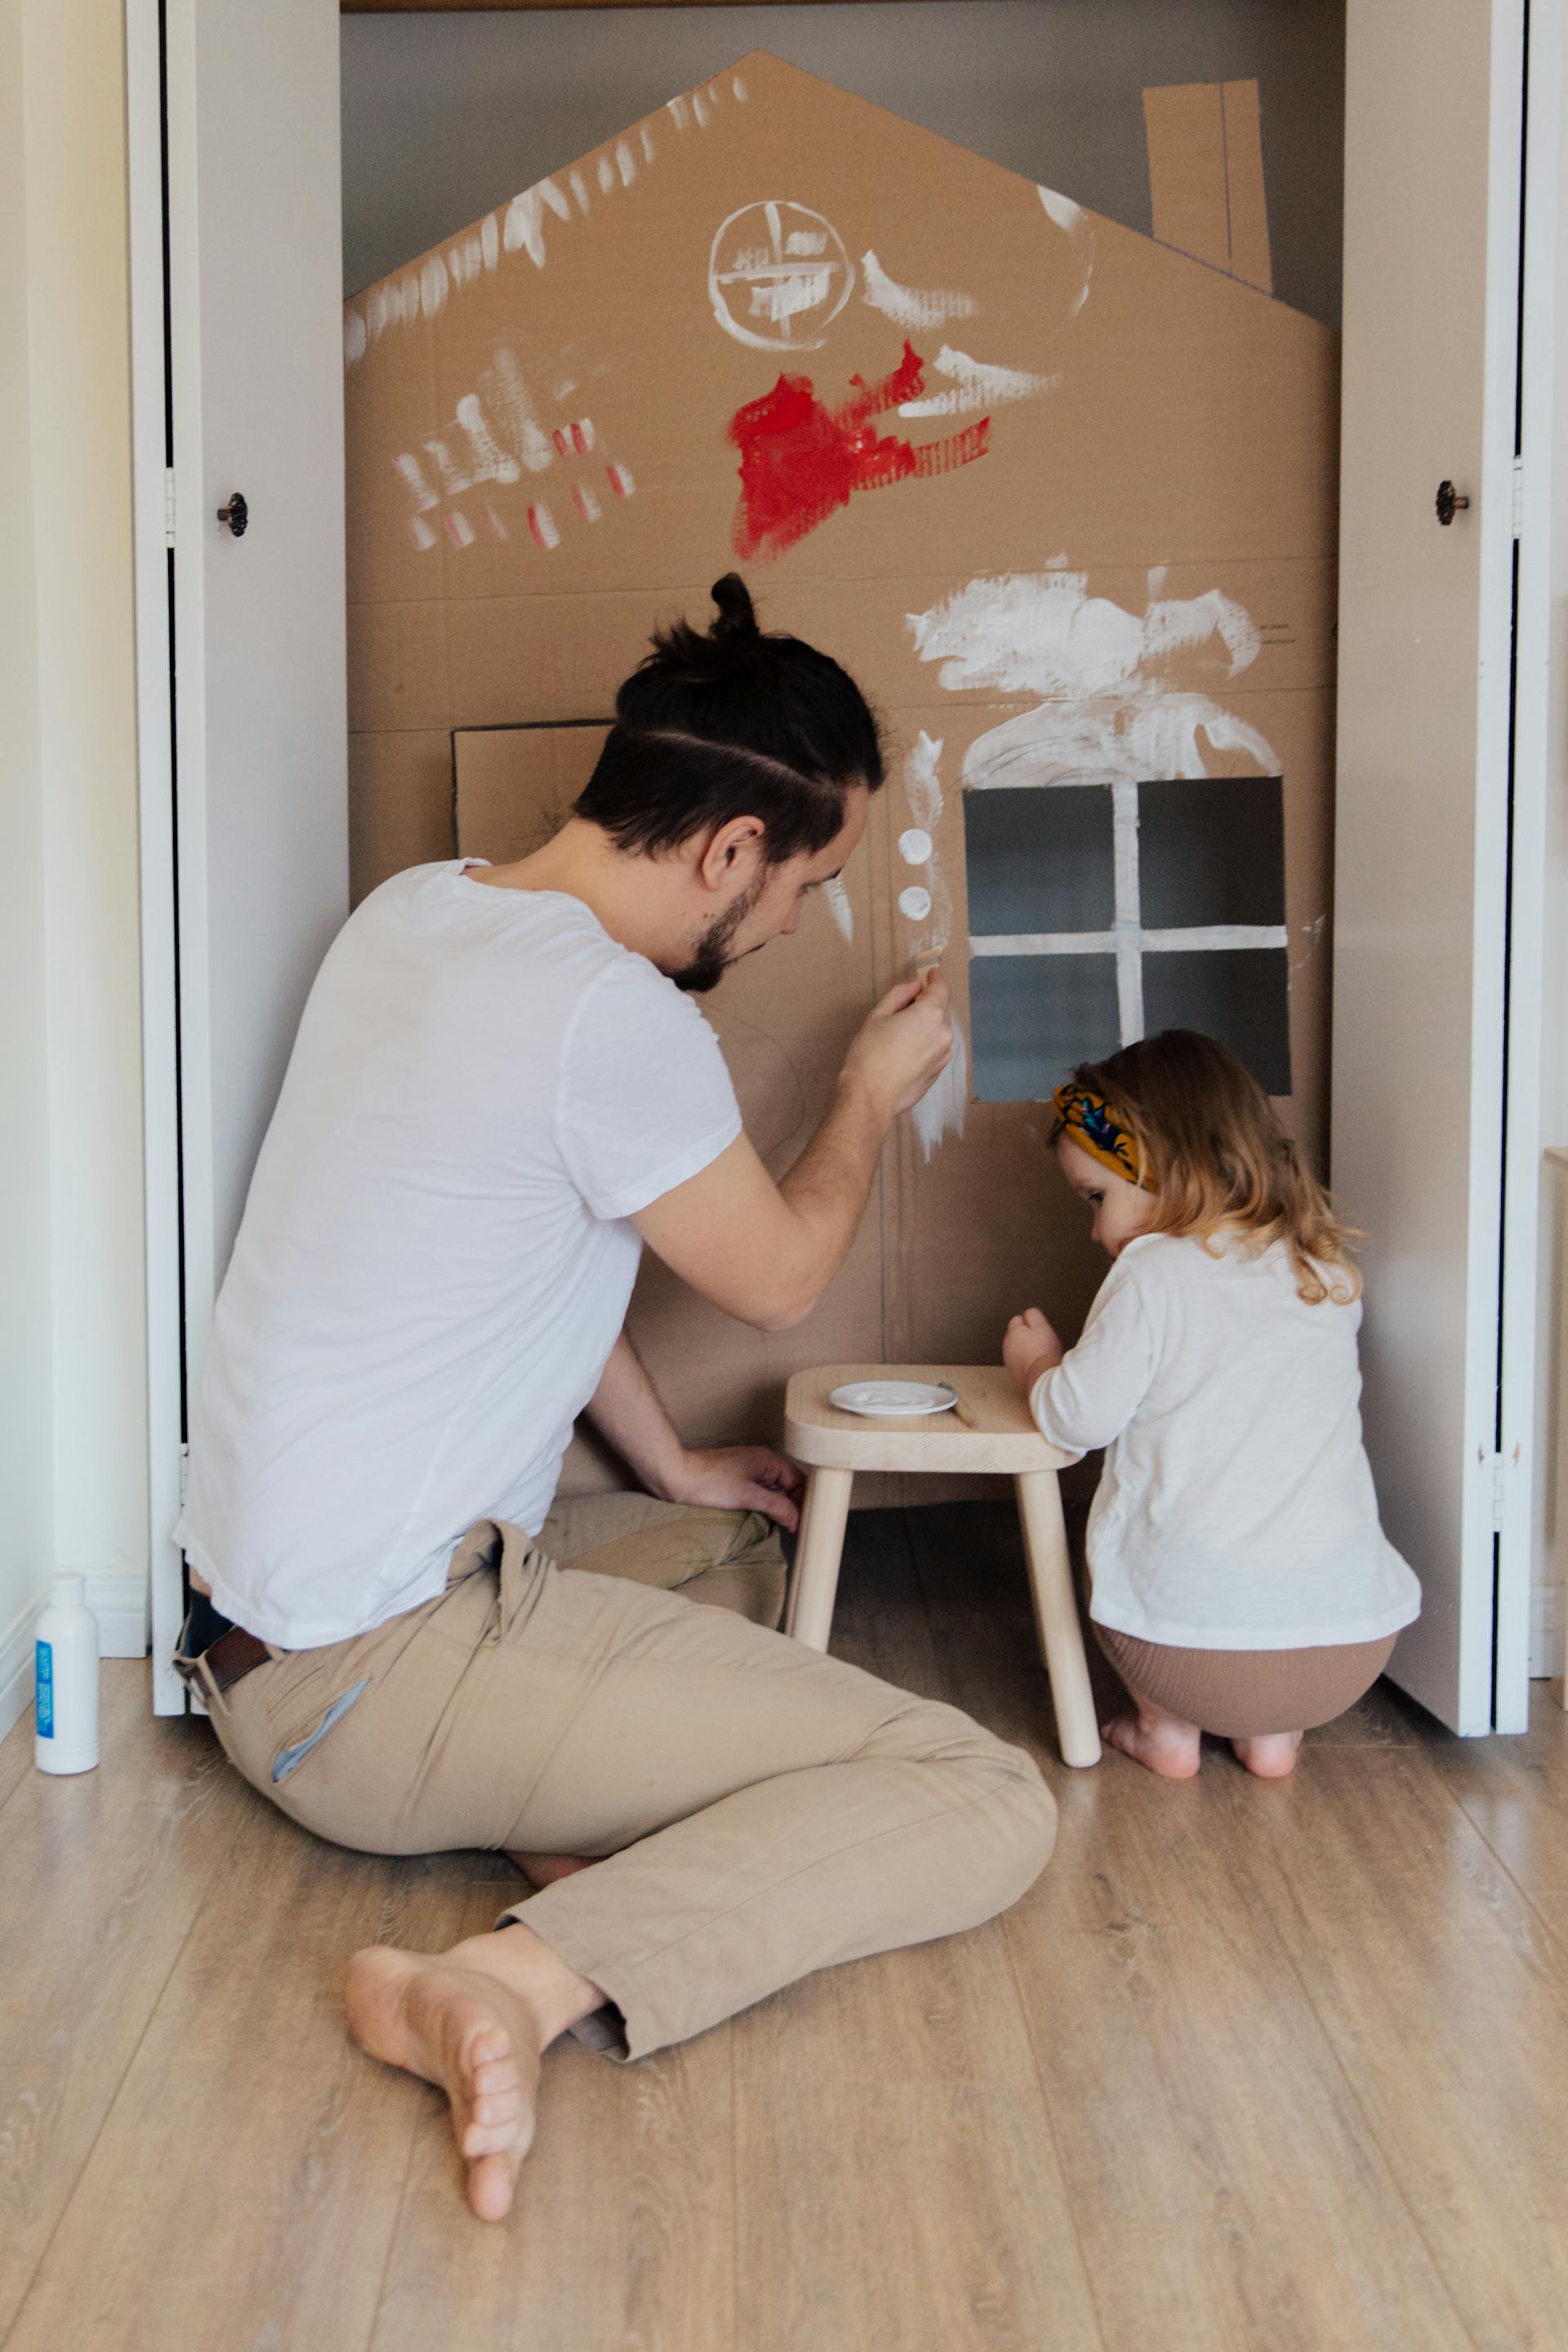 A father and daughter playing together | Source: Pexels